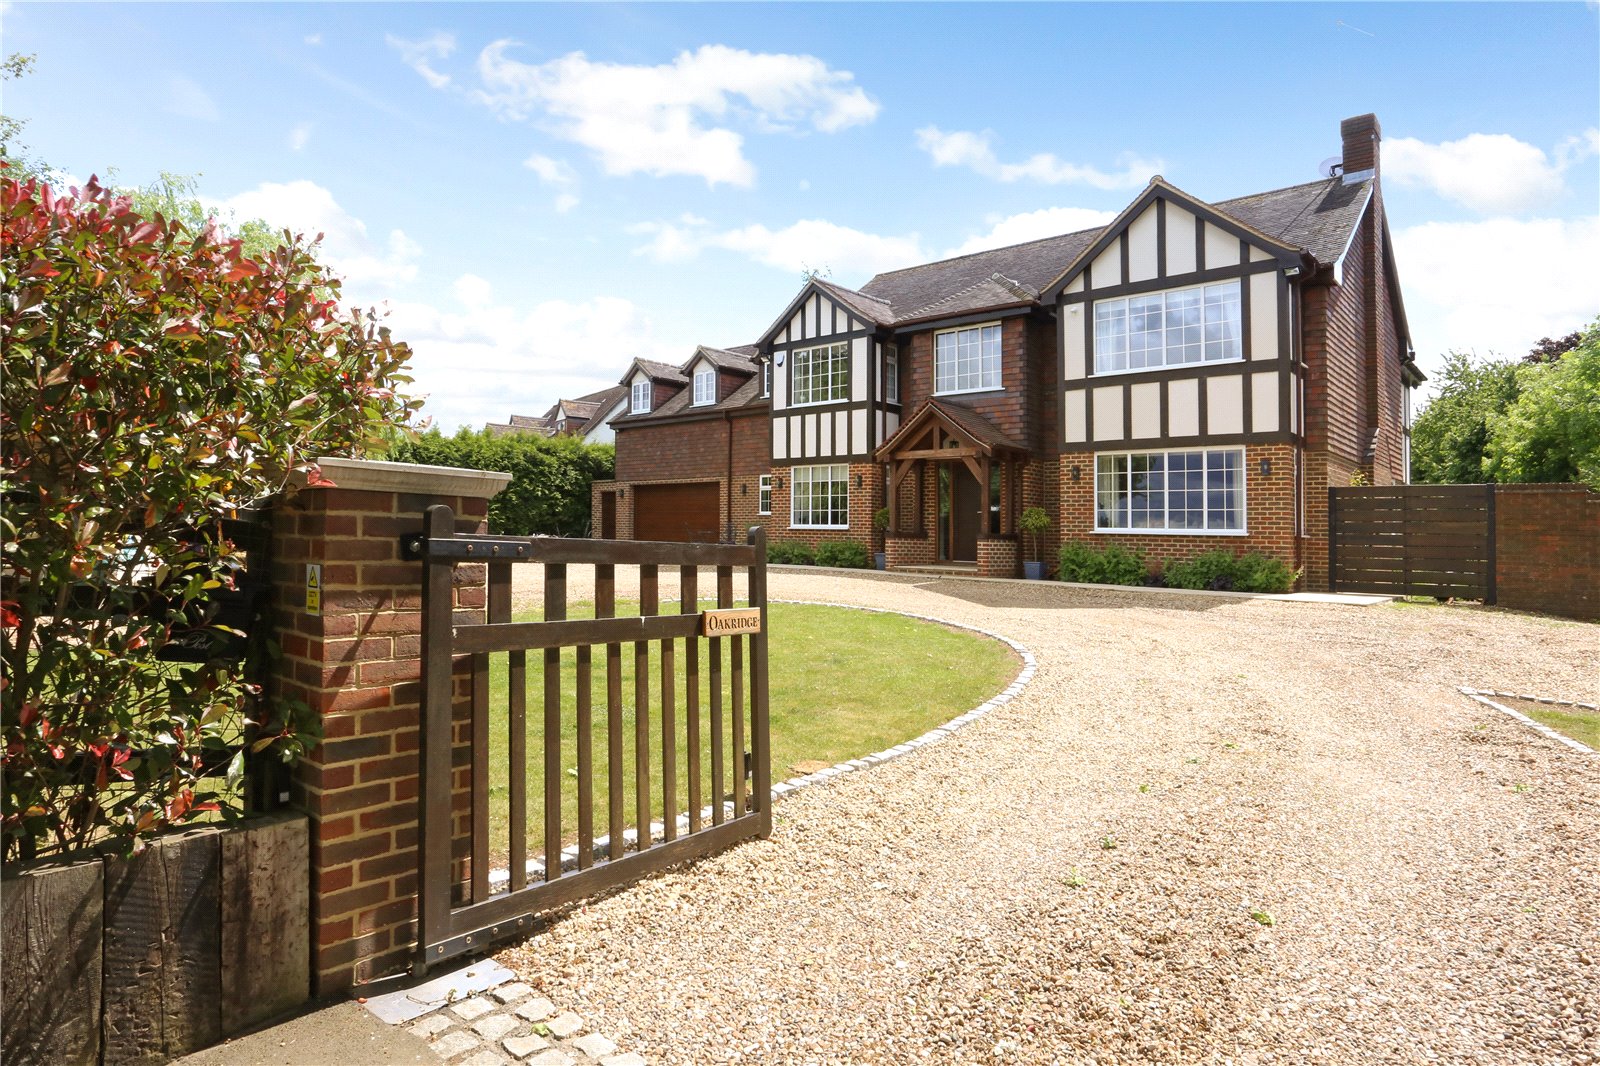 7 Bedroom Detached House For Sale The Luxury Marketplace